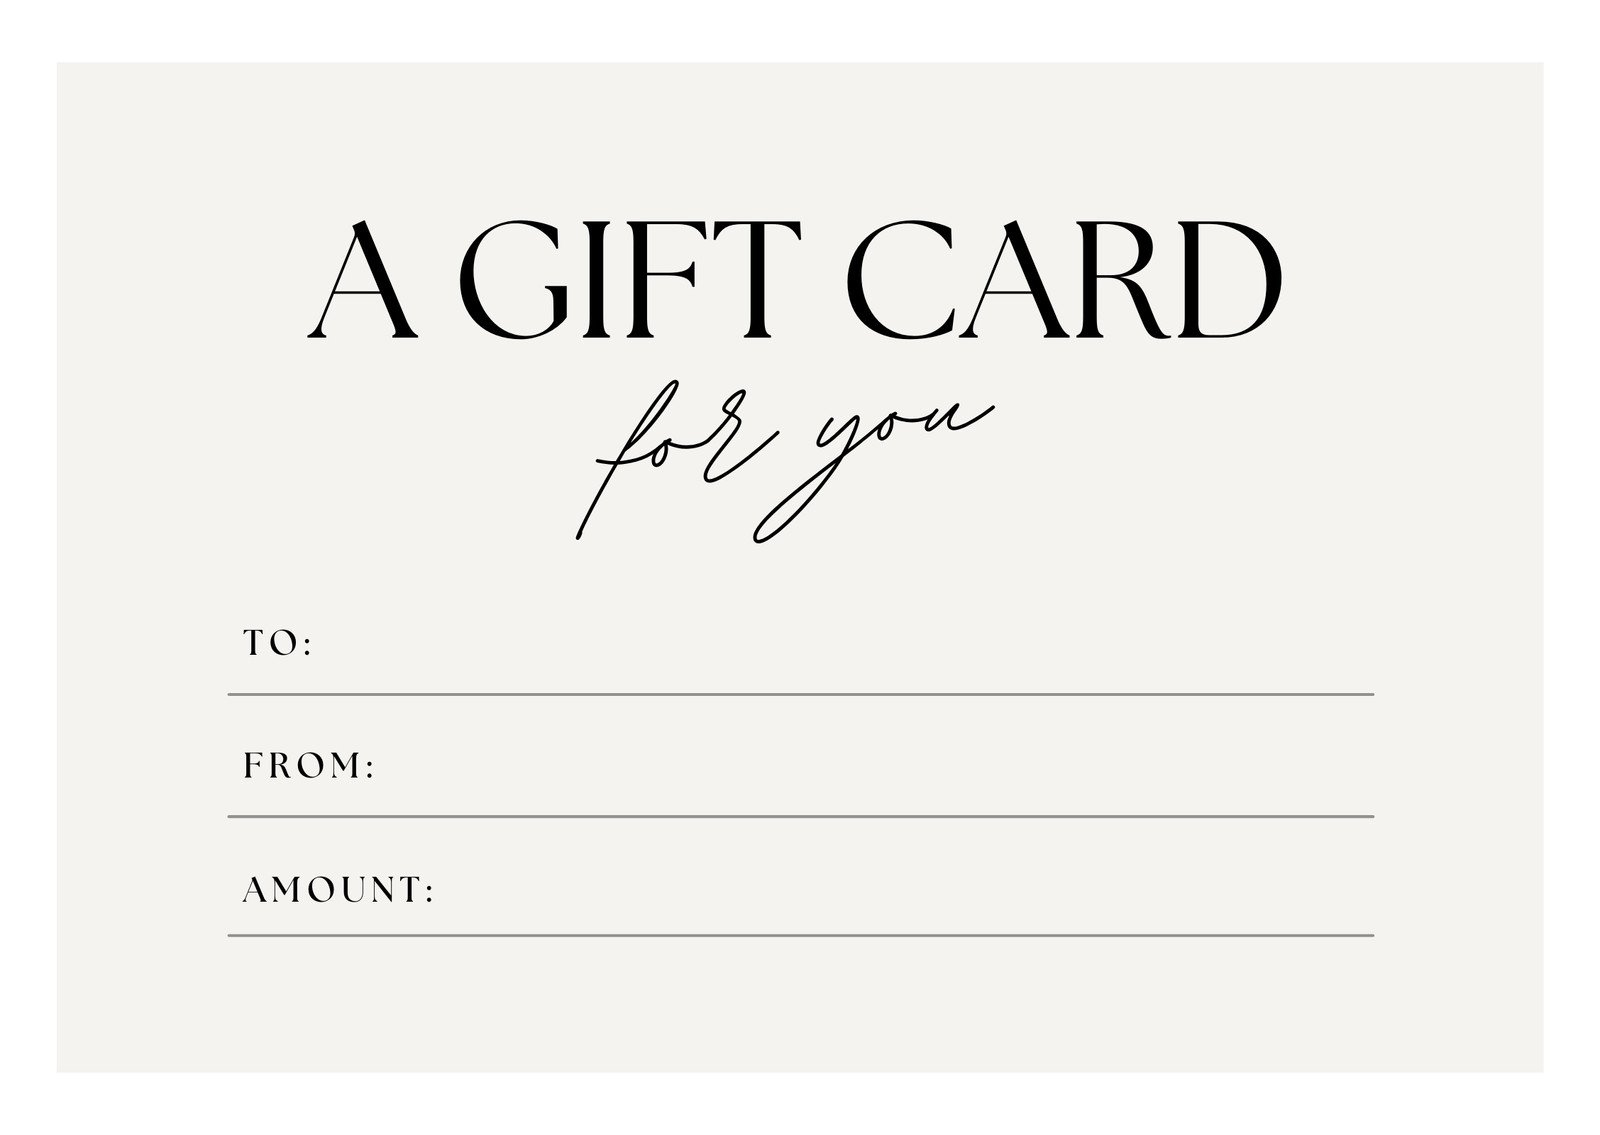 Custom Gift Certificates - Printable Gift Cards | Canva within Free Printable Gift Cards